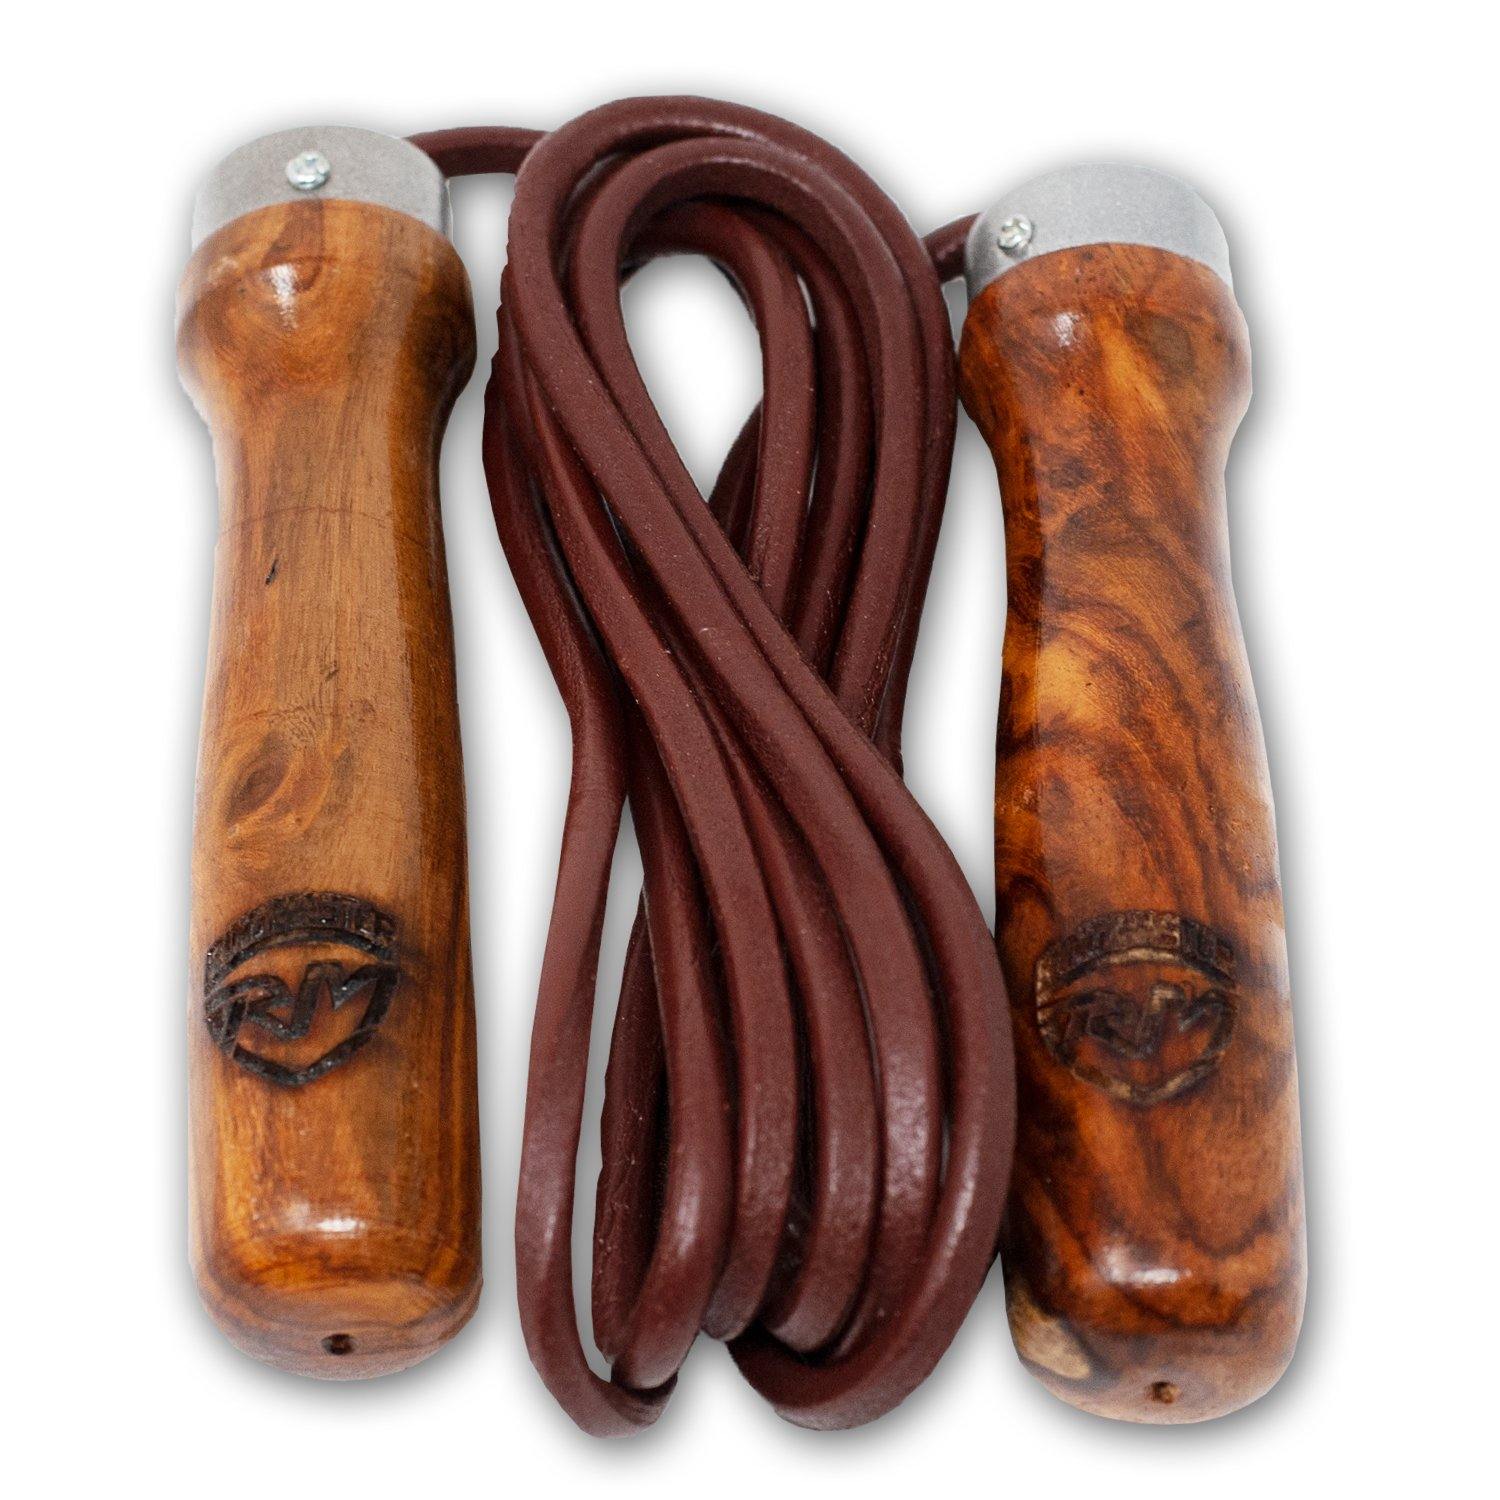 wooden skipping ropes,  jump rope,  jumprope,  skipping for weight loss,  weighted skipping rope,  boxing skipping rope,  skipping good for weight loss,  weighted jump rope,  speed rope,  best jump rope,  skipping exercise,  skipping rope for weight loss,  jumping rope exercise,  best skipping rope,  best jump rope for beginners,   Ringmaster Sports Head guard,  Ringmaster Sports Equipment,  Ringmaster boxing Equipment